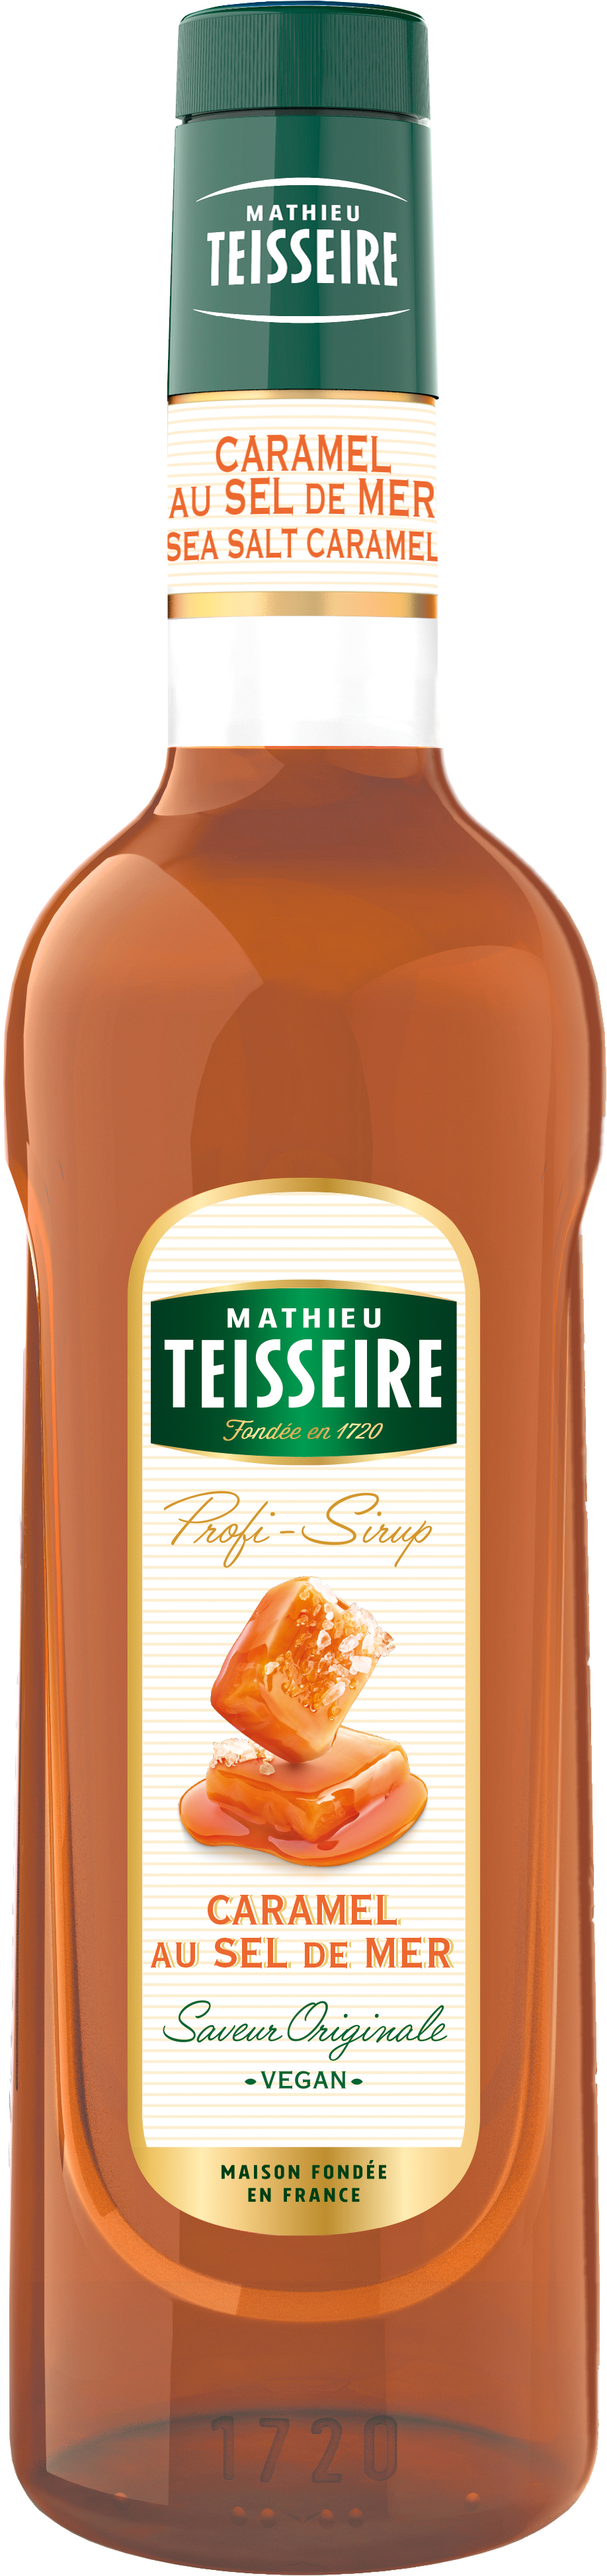 Teisseire Cassis Sirup - 0,7L